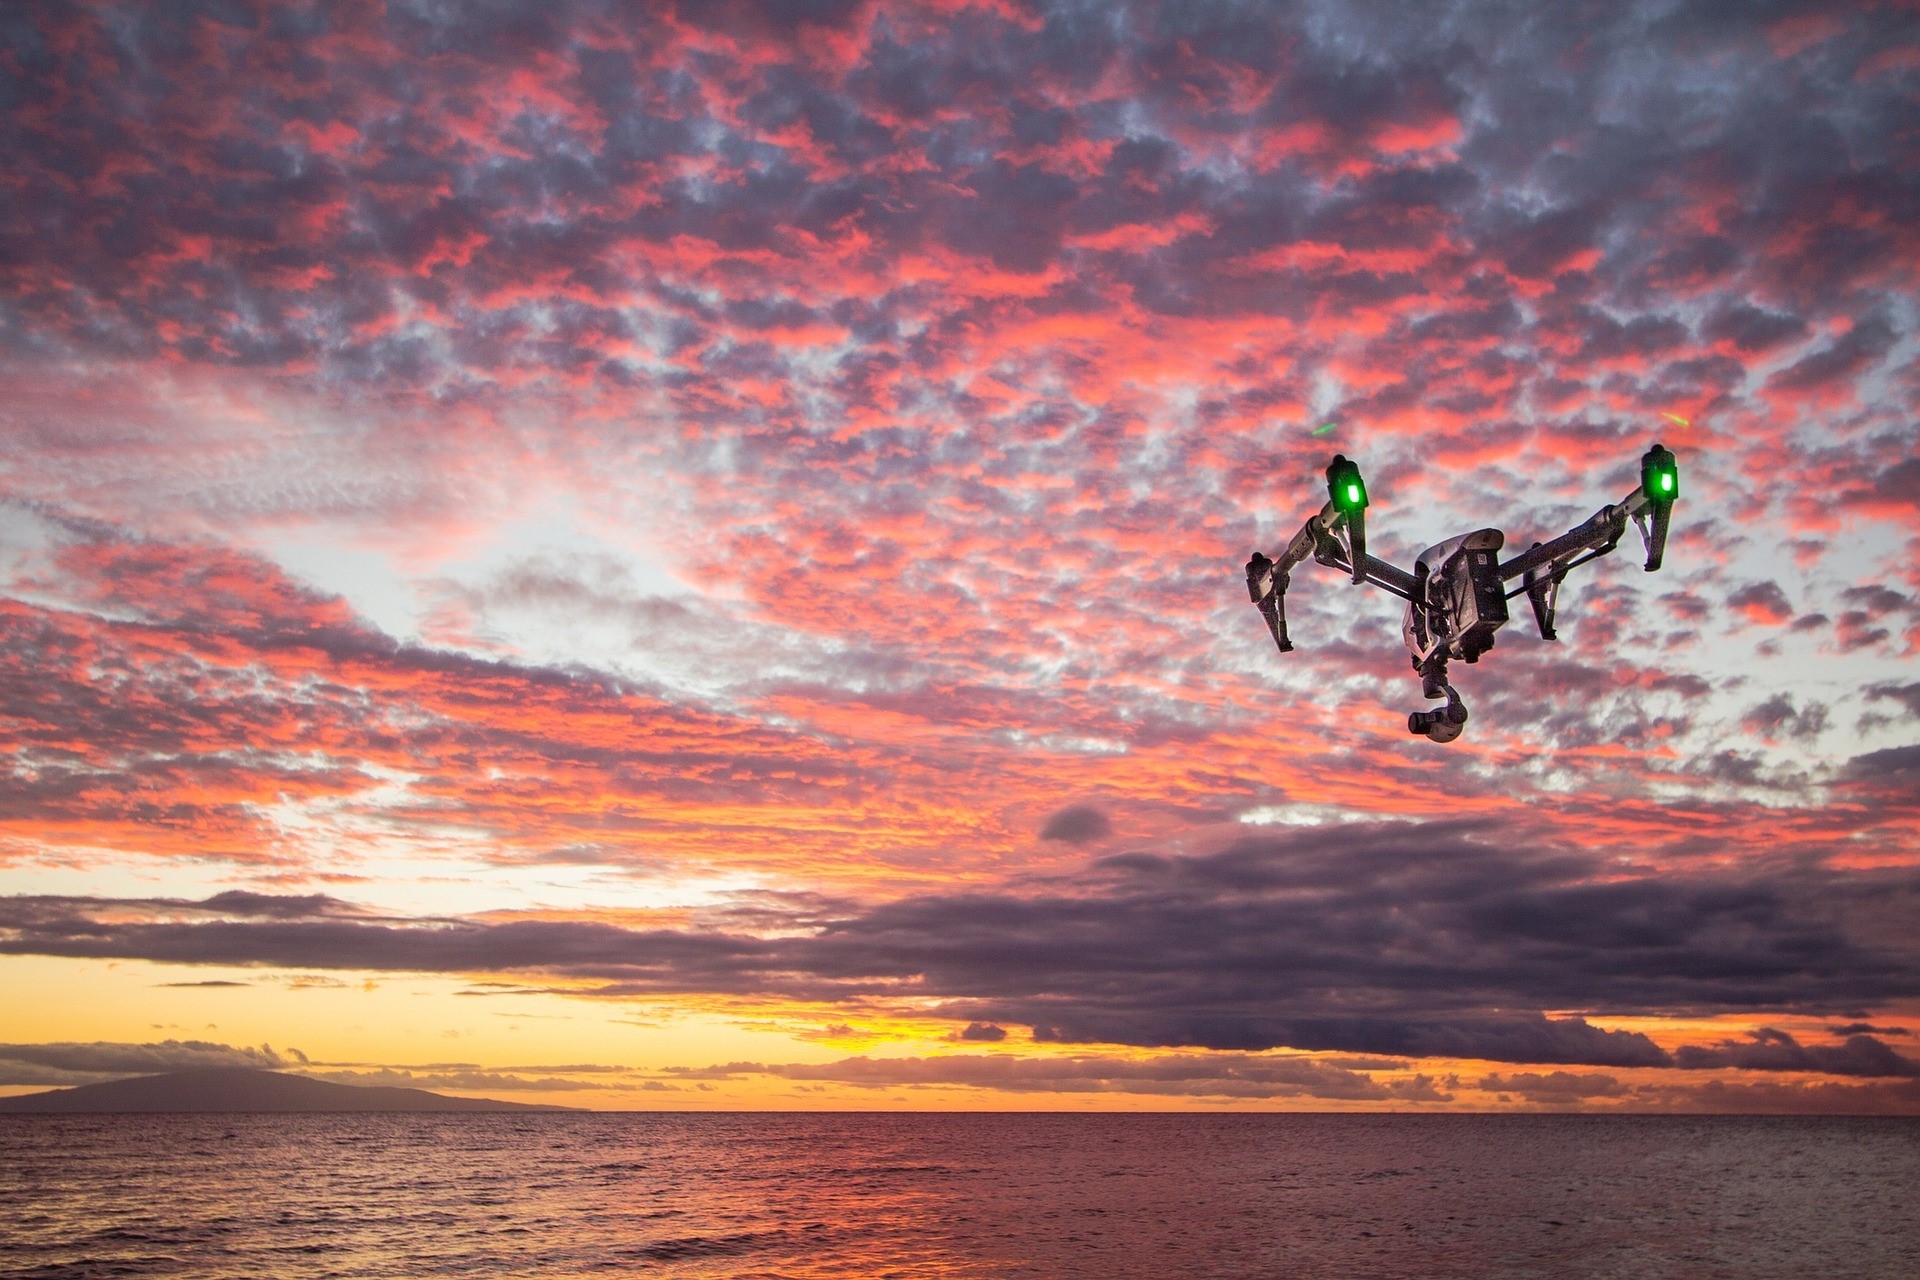 A drone flying against a sunset